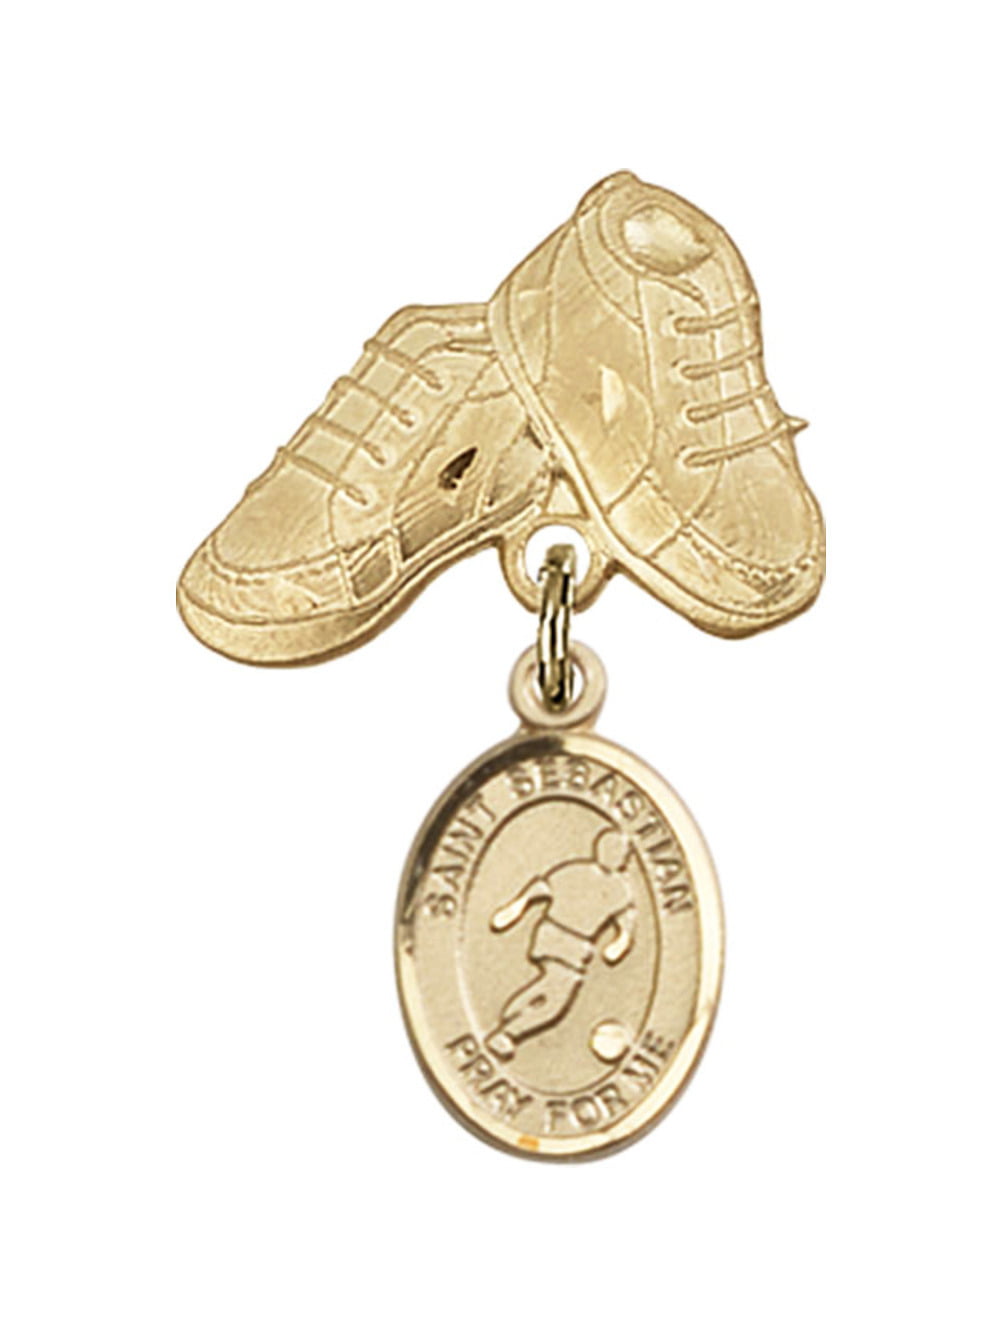 14kt Yellow Gold Baby Badge with St. Sebastian/Soccer Charm and Baby Boots  Pin 1 X 5/8 inches